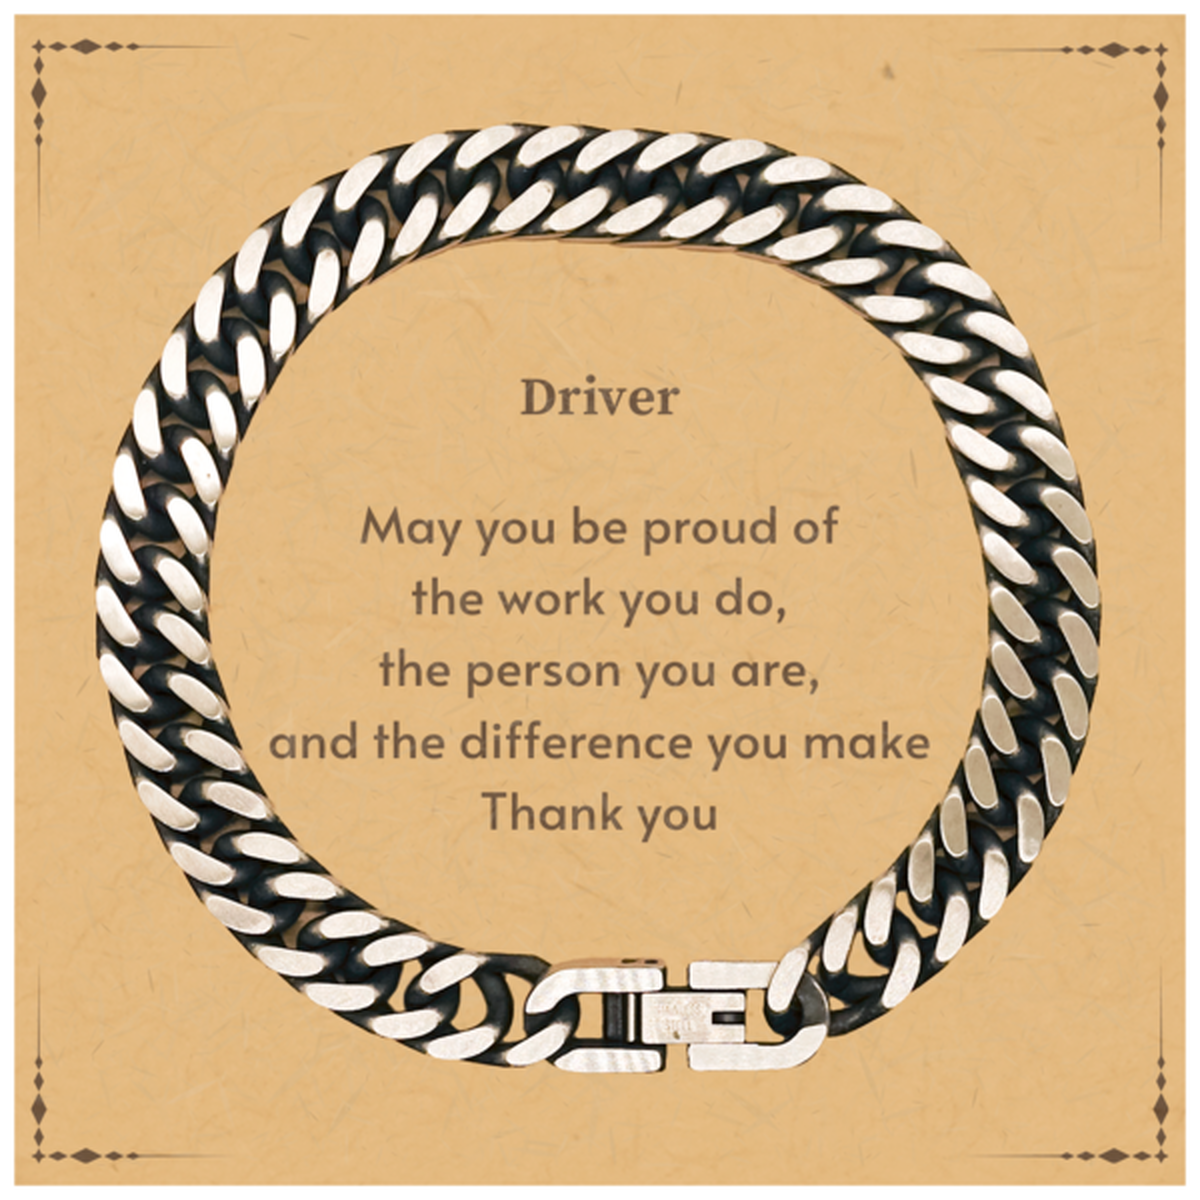 Heartwarming Cuban Link Chain Bracelet Retirement Coworkers Gifts for Driver, Driver May You be proud of the work you do, the person you are Gifts for Boss Men Women Friends